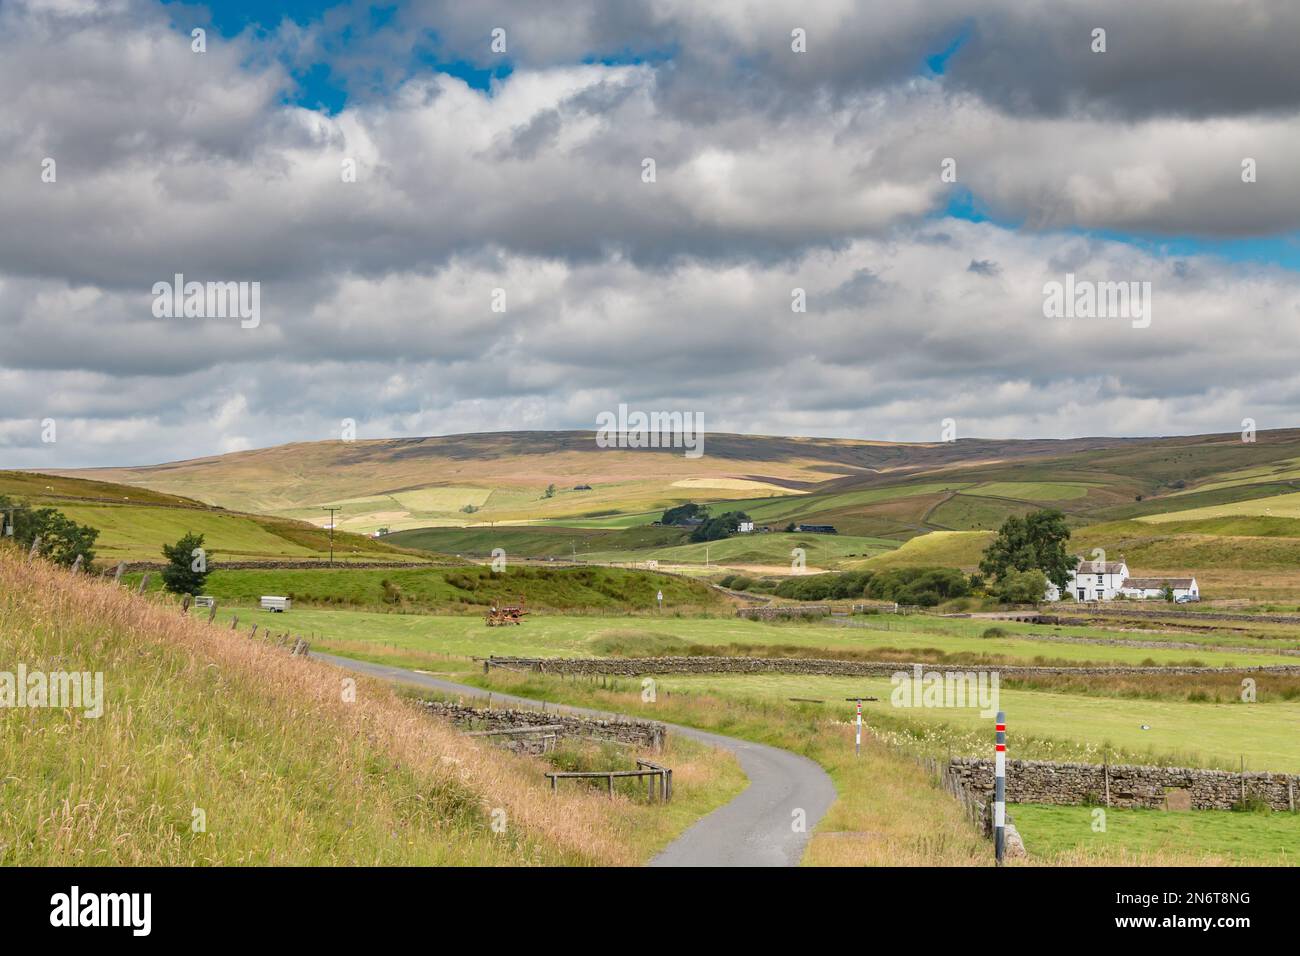 Patchy Sunshine and shadows across the landscape in this view of Harwood, Upper Teesdale. Stock Photo